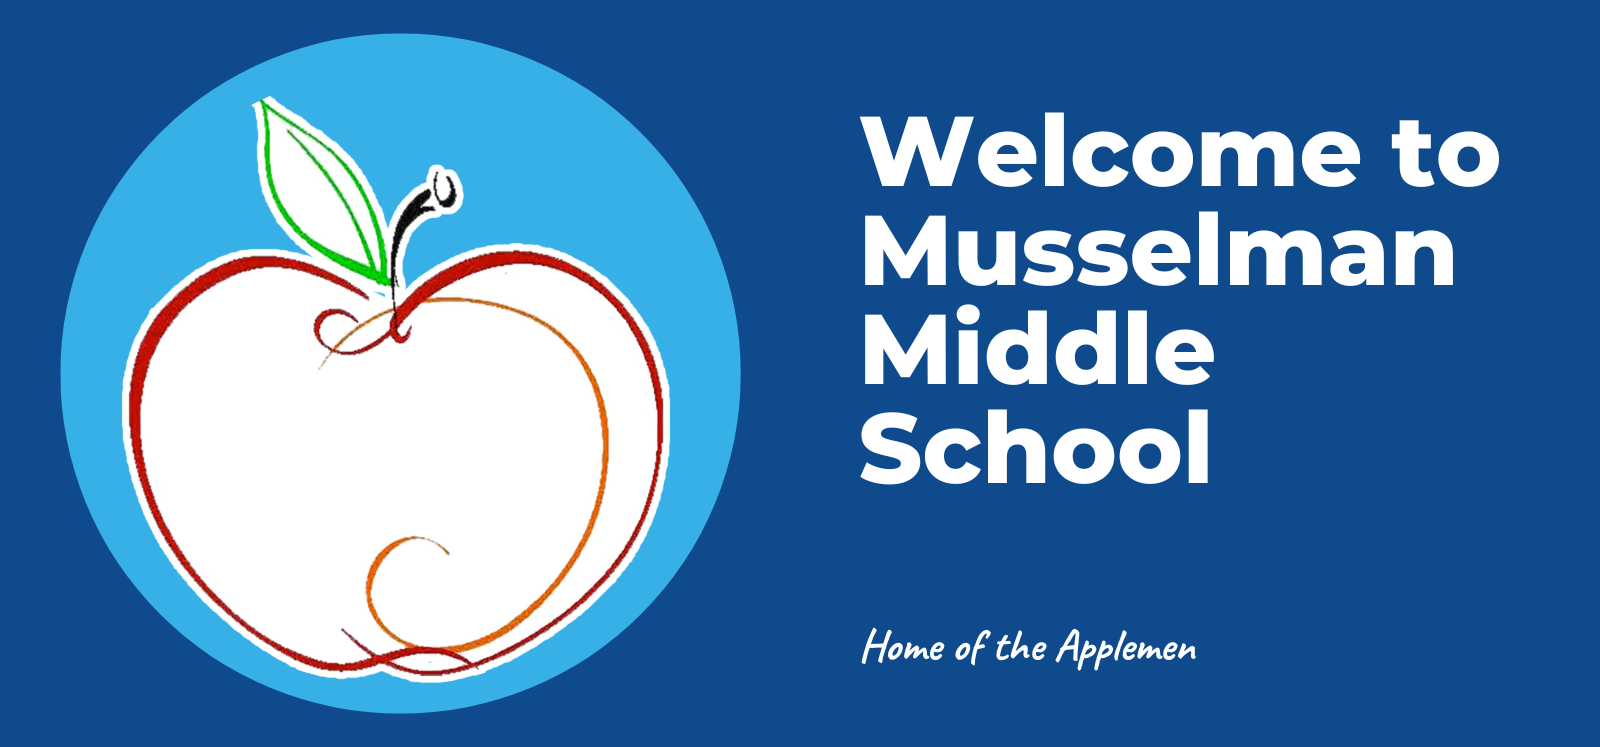 image of banner that says welcome to musselman middle school home of the applemen